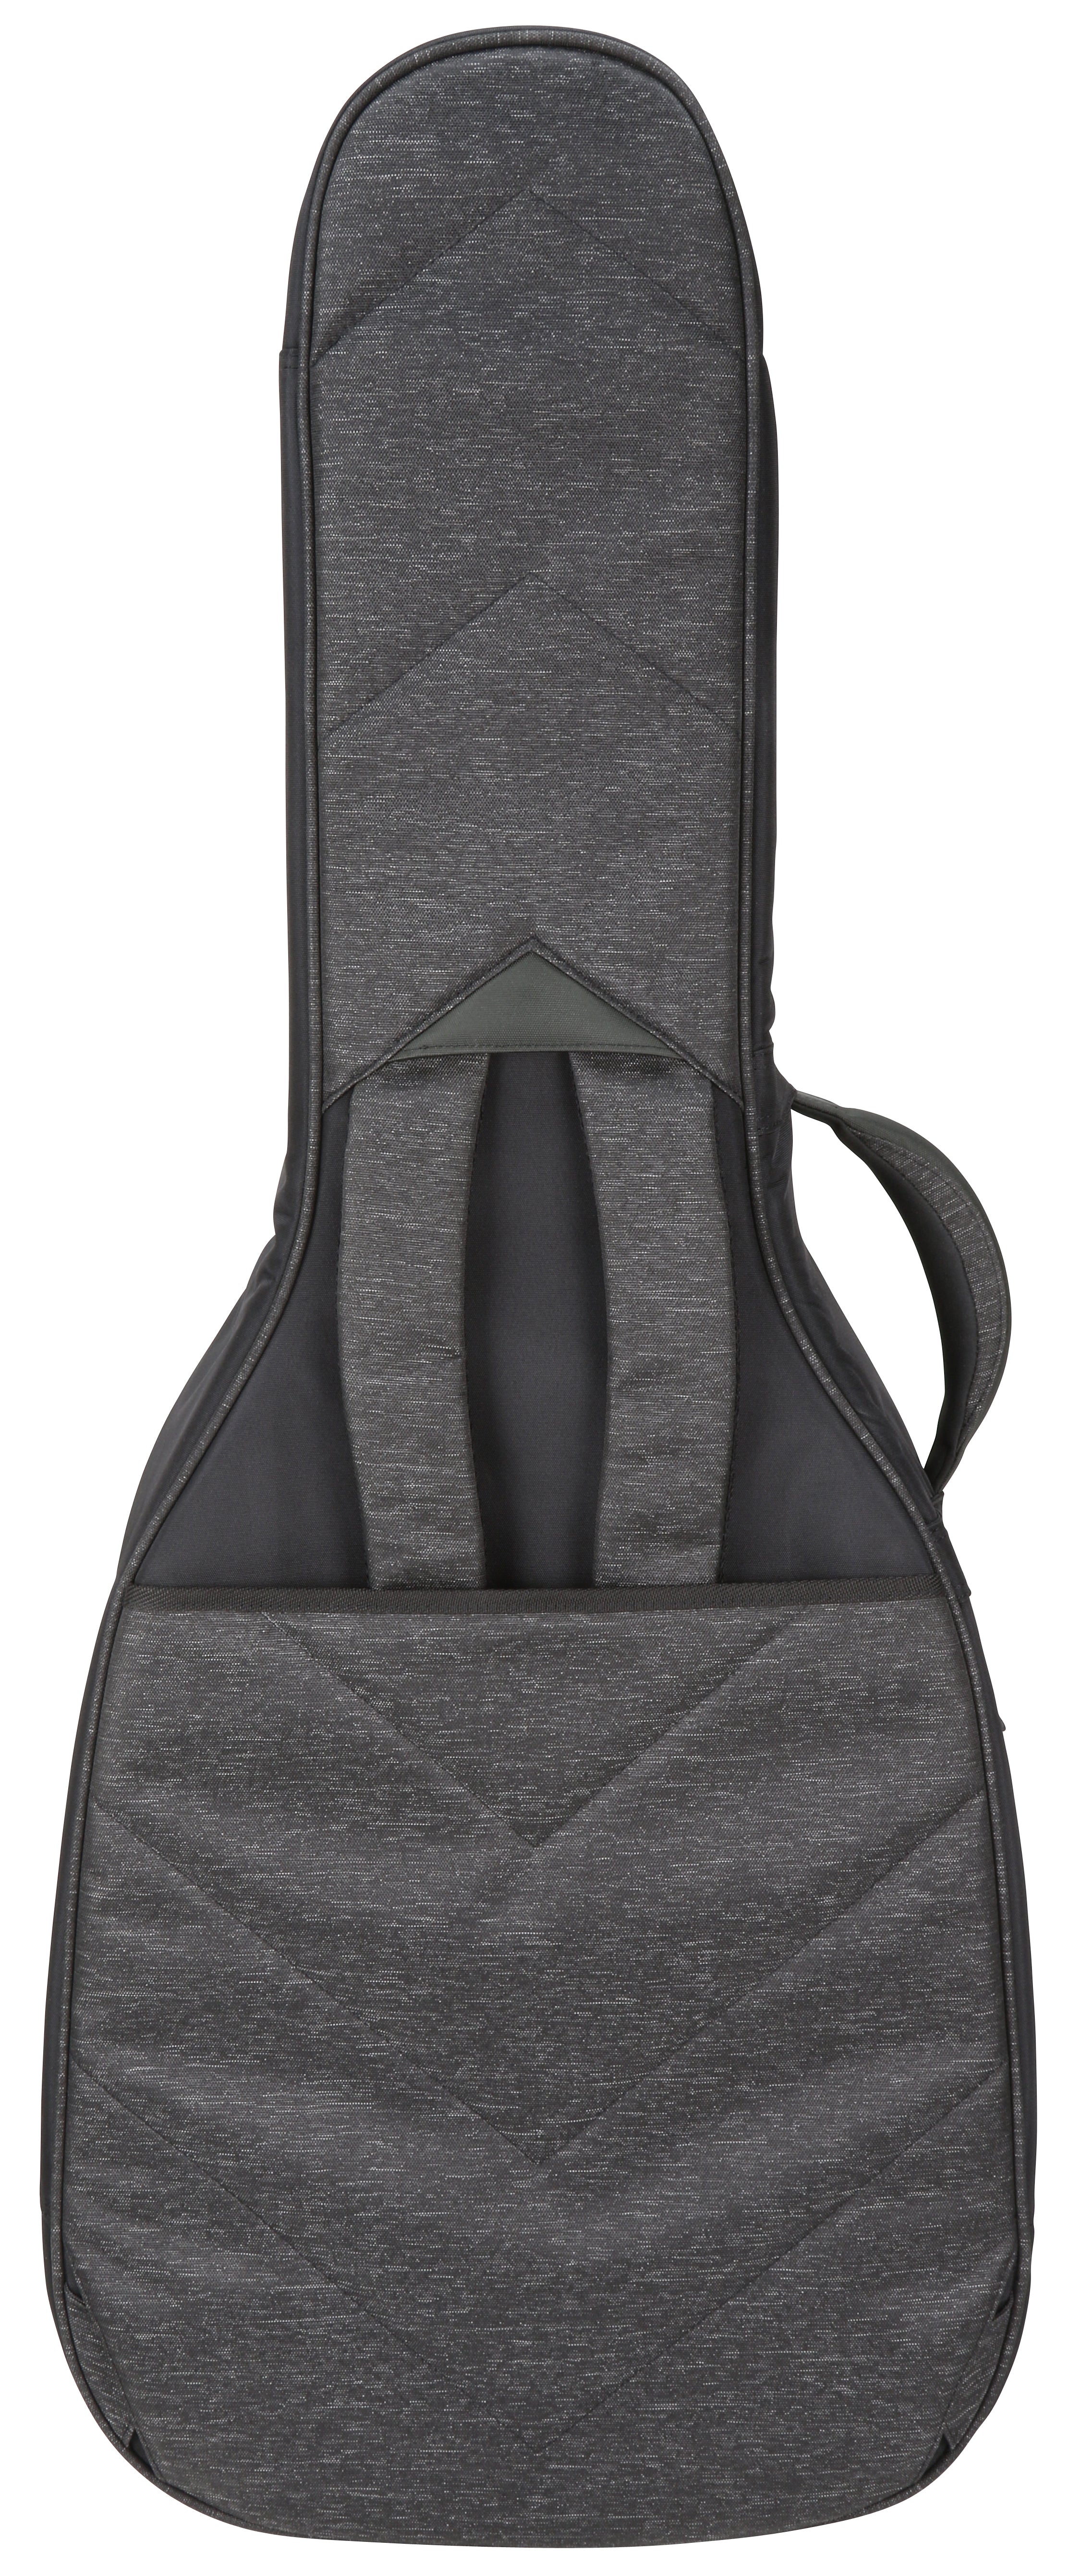 RBX Oxford Small Body Acoustic Guitar Bag